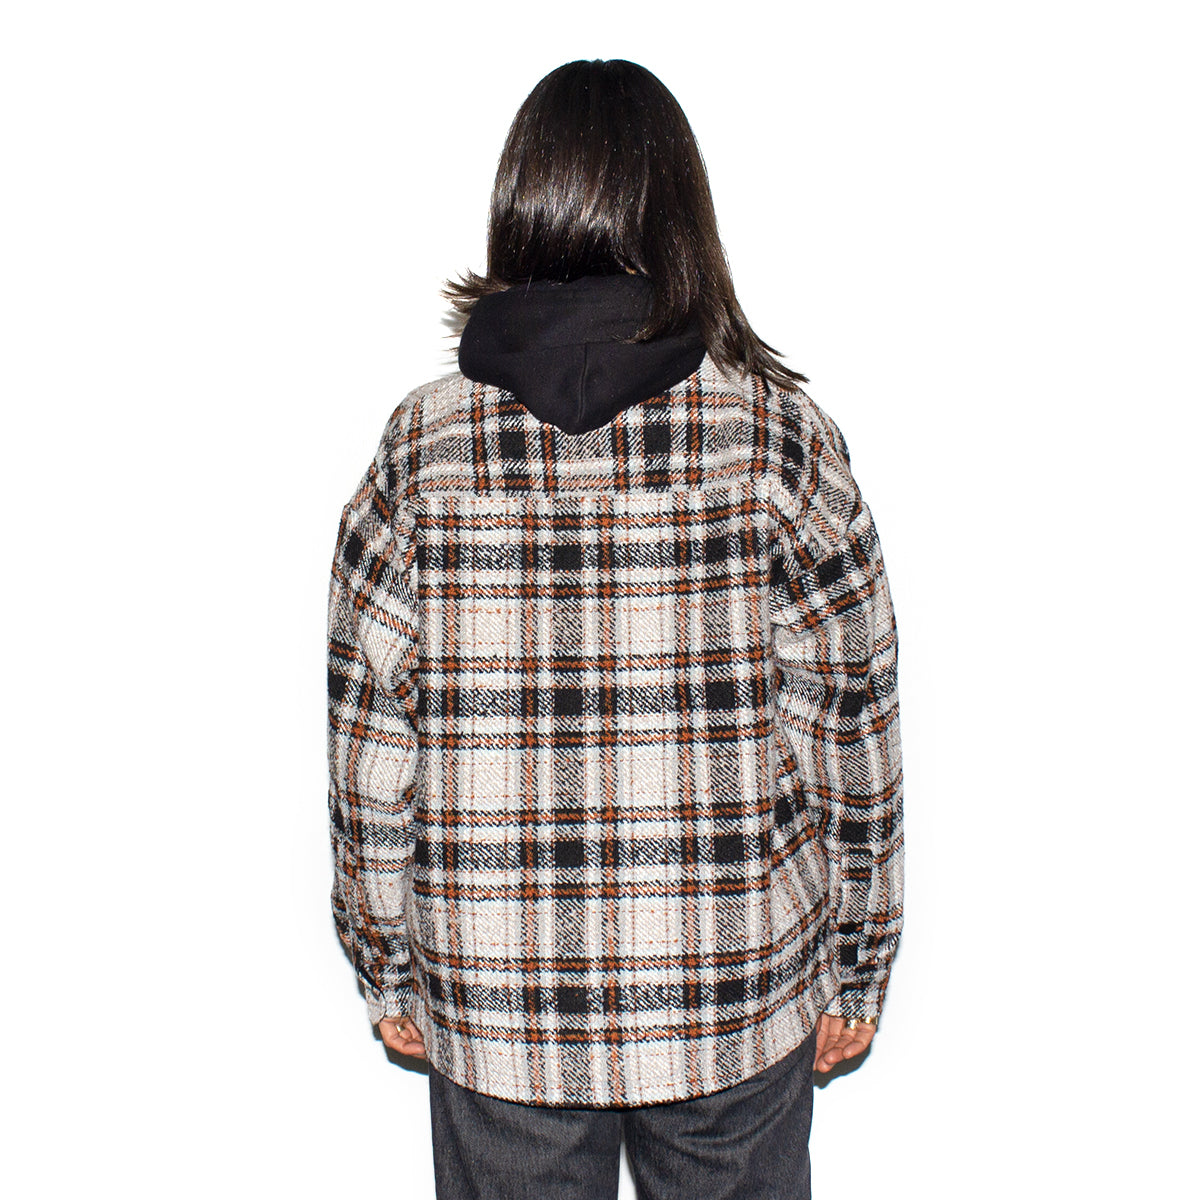 Carhartt WIP | Women's Stroy Shirt Jacket Style # I032277-1PV Color : Stroy Check / Wax